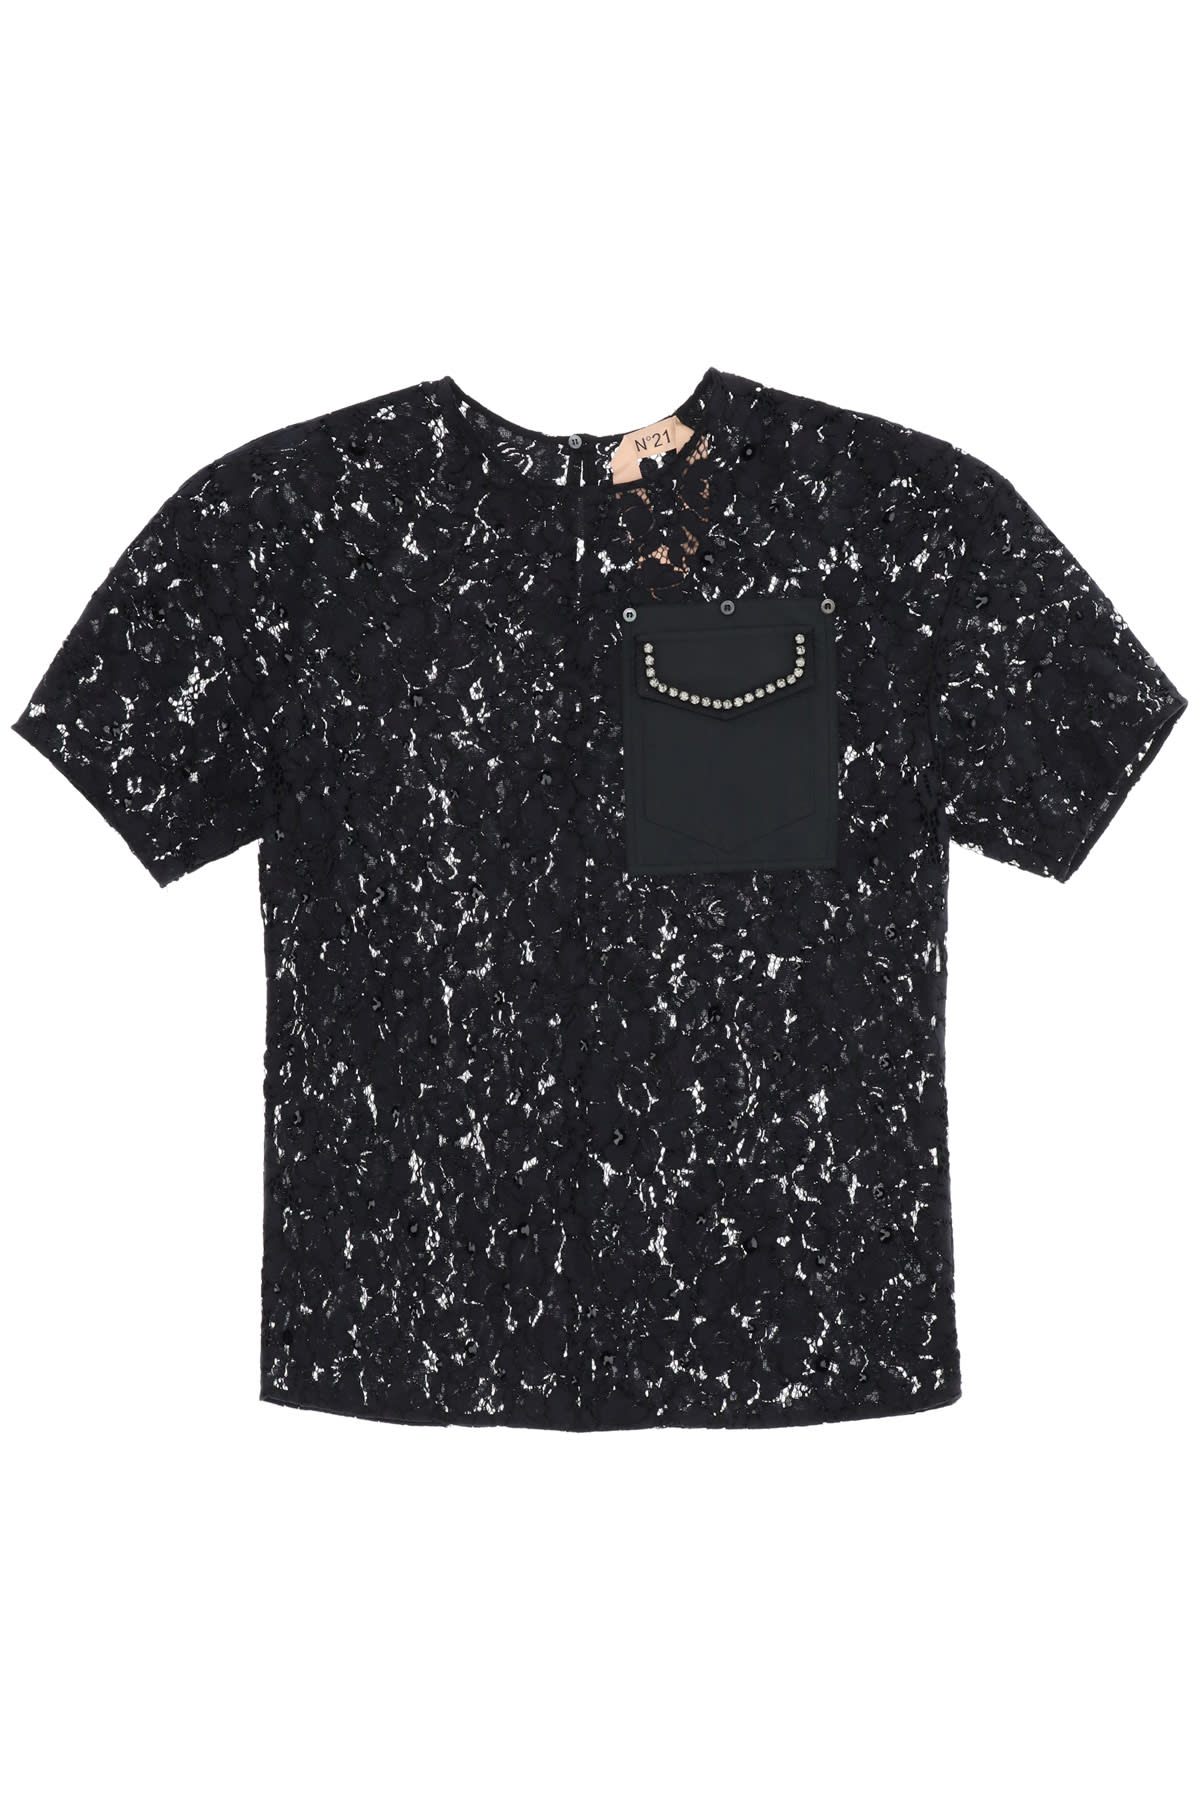 N.21 Lace Top With Pocket And Crystals